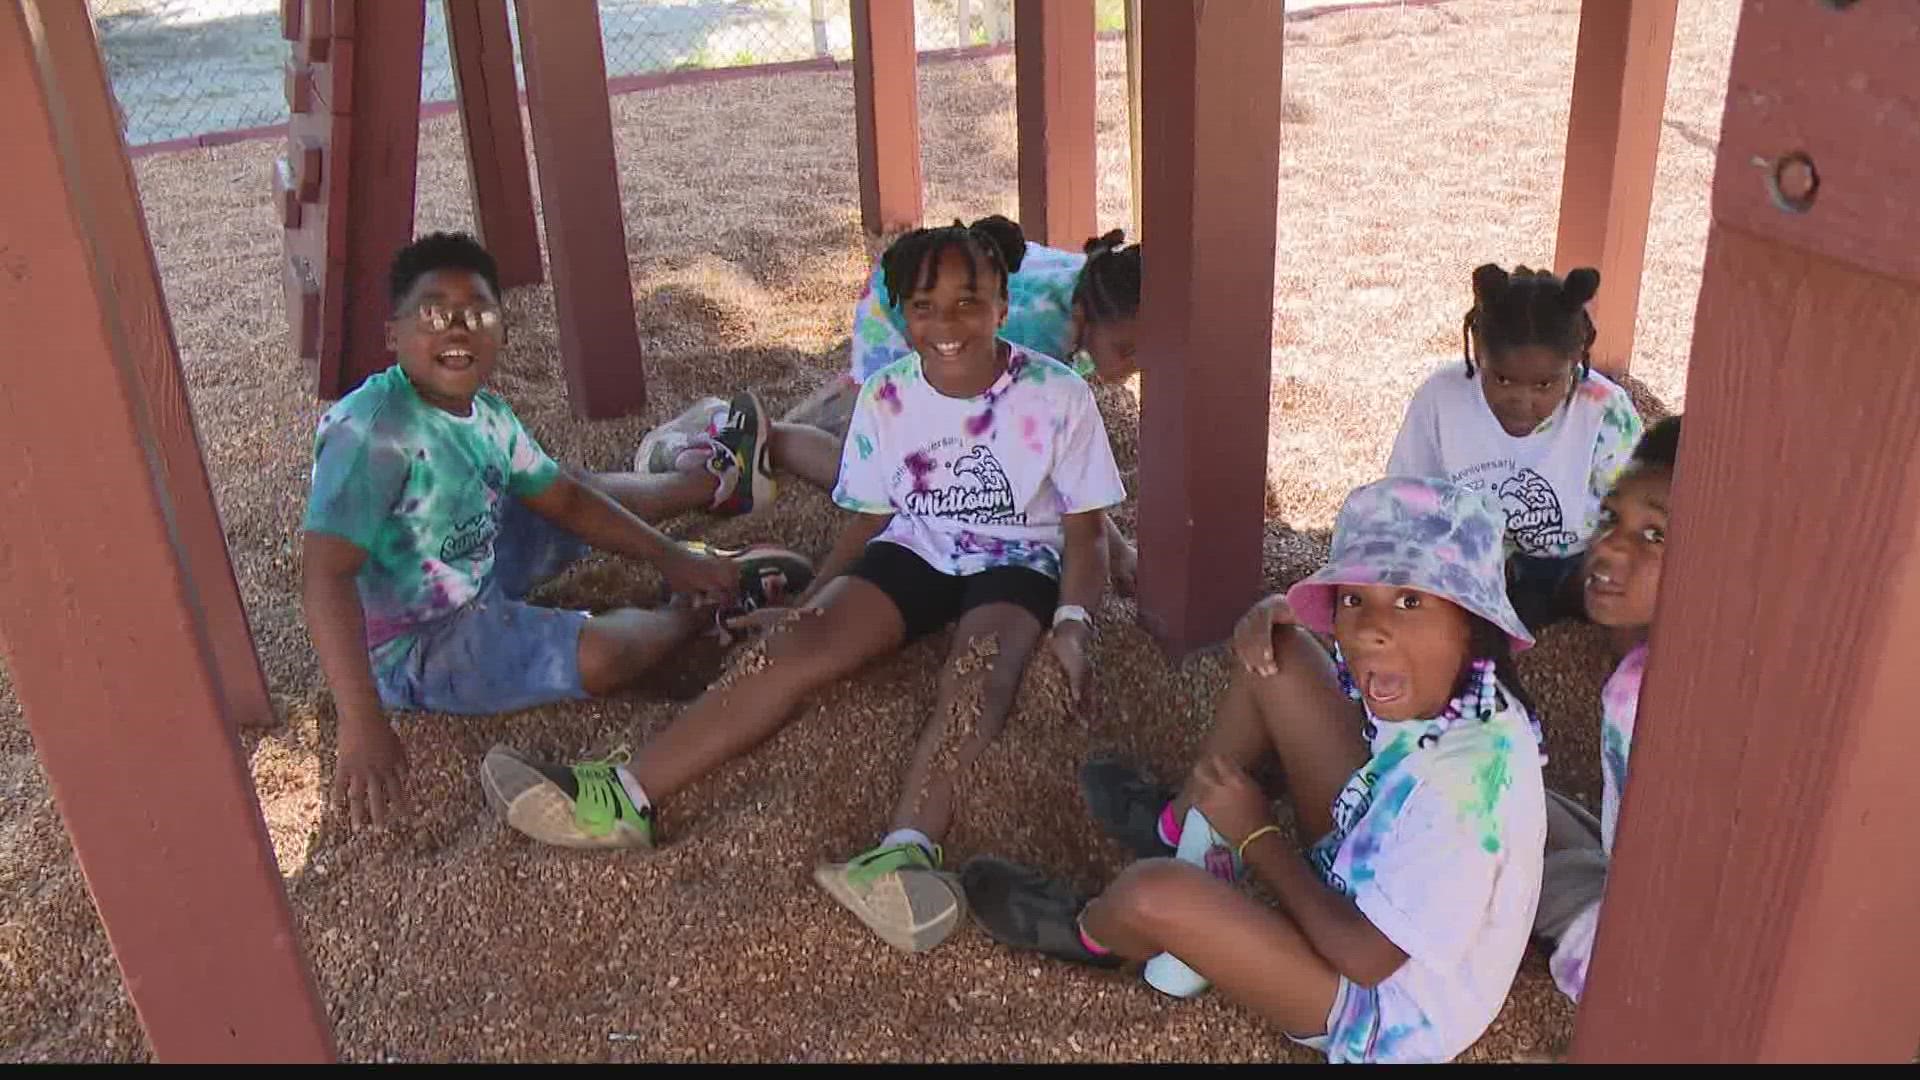 The children from Midtown Community Services Summer Day Camp were the latest to call for an end to the violence.